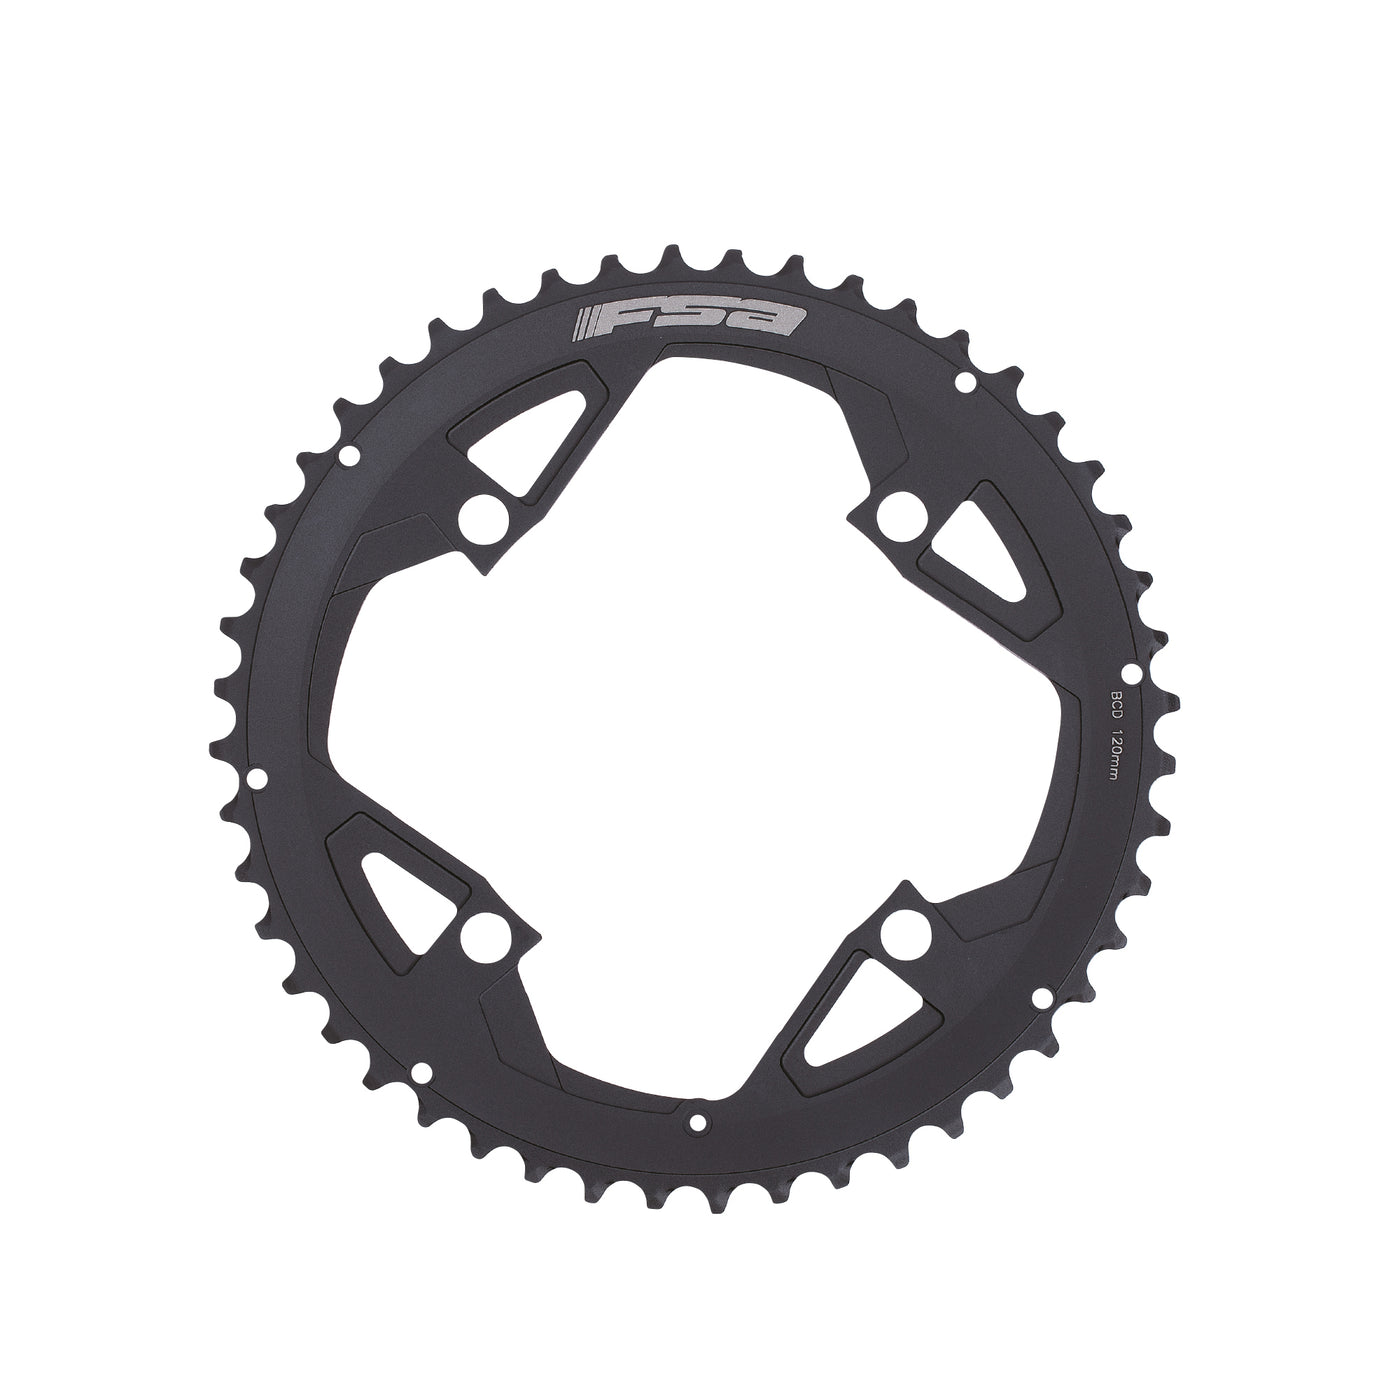 Gossamer Pro ABS Road Chainring